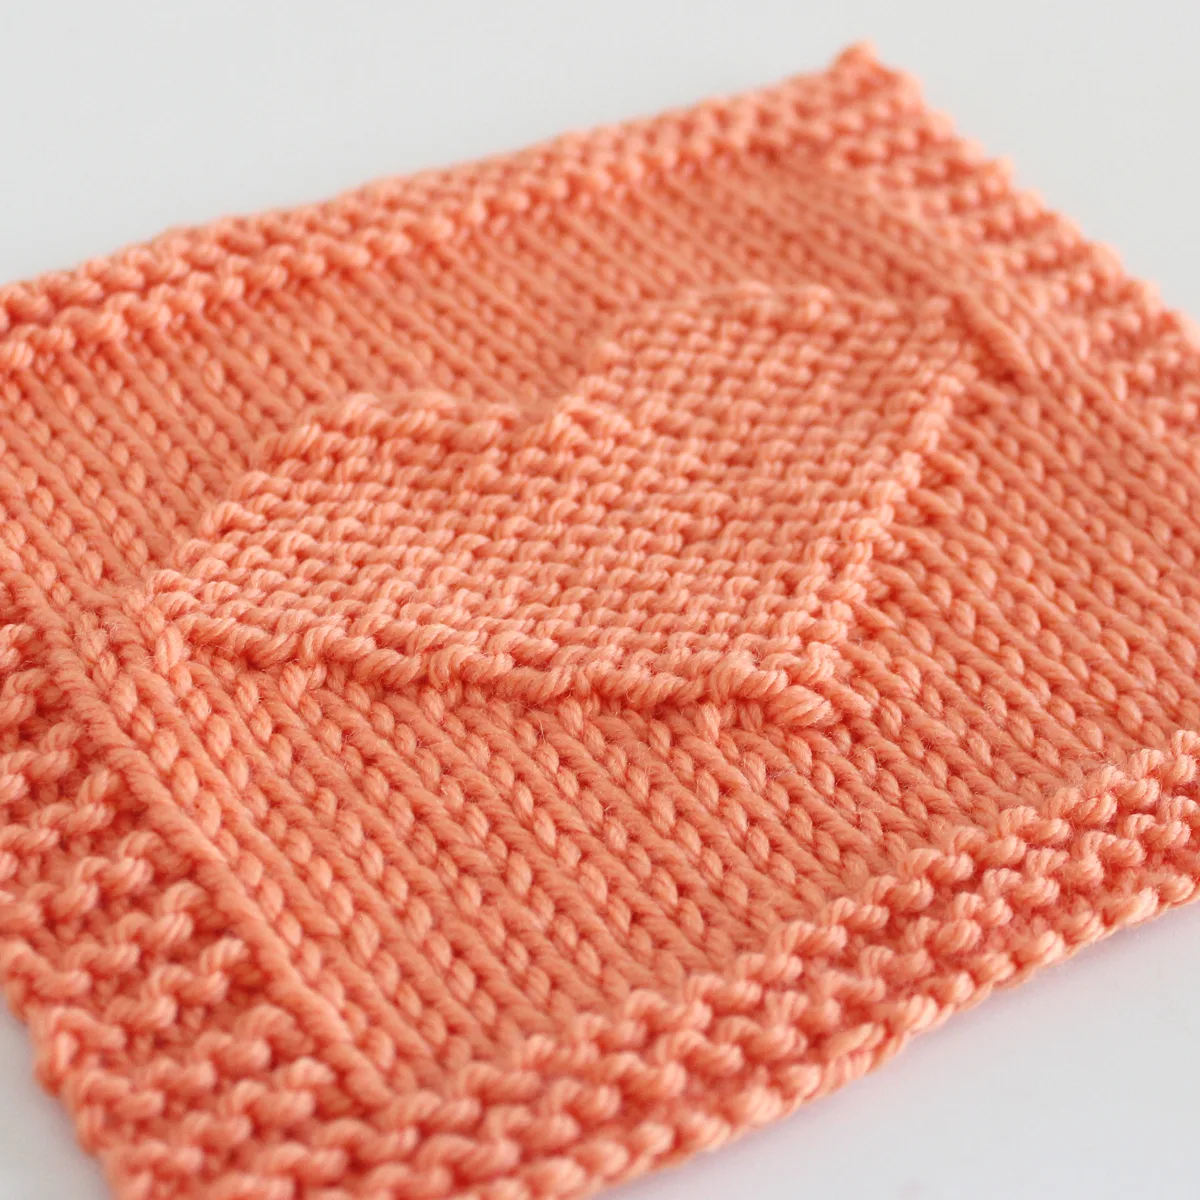 Heart Square knitted in orange color yarn.